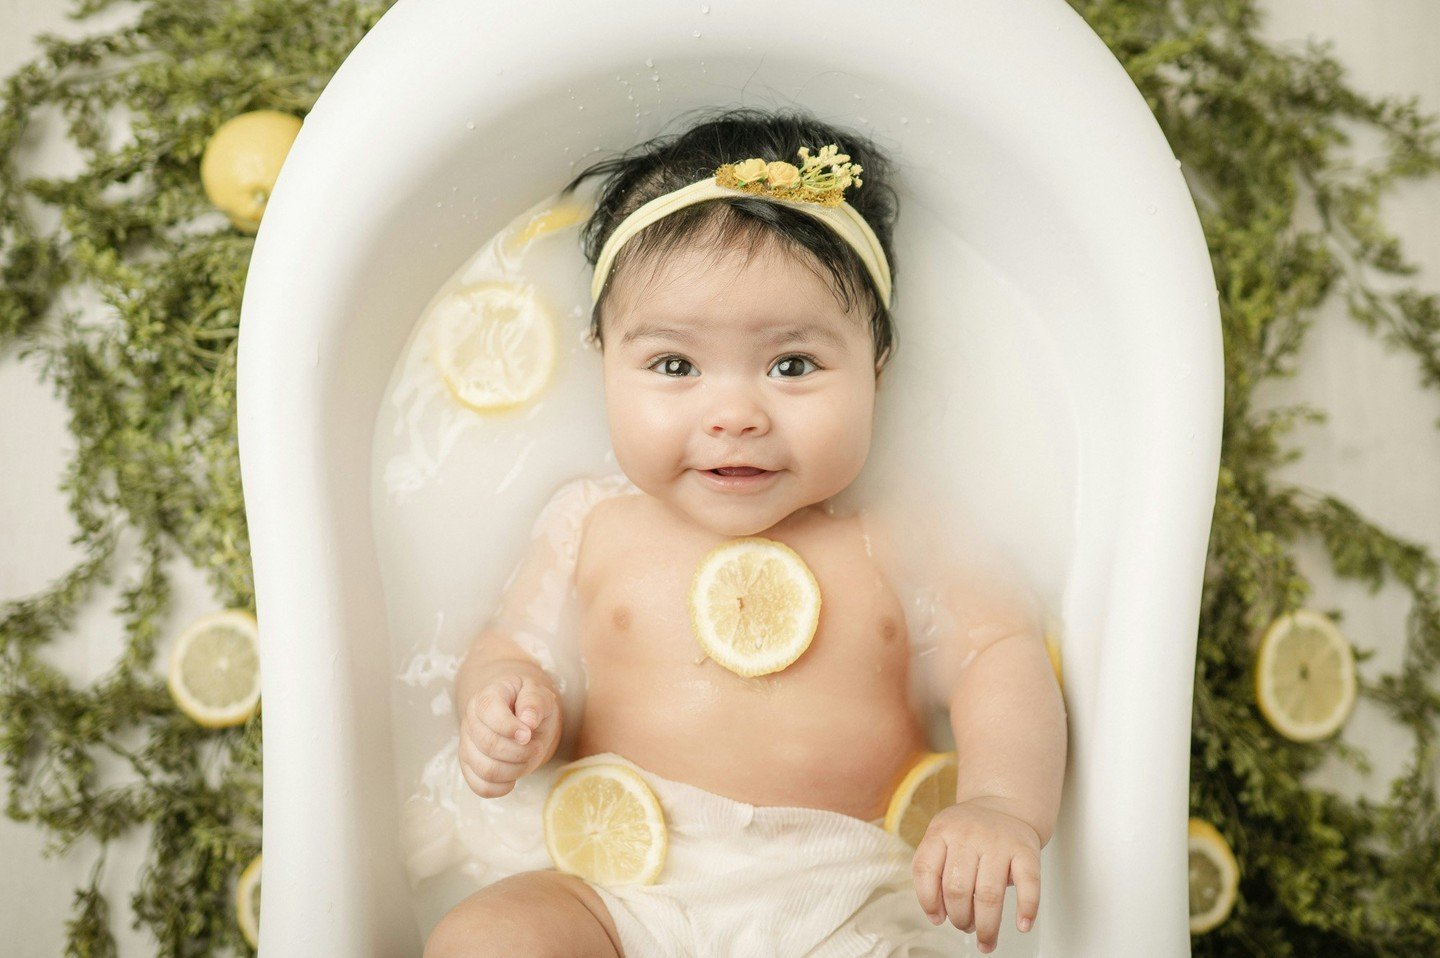 How cute is baby girl in yellow in her milk bath?

Now offering milk bath add ons for our milestone and cake smash sessions! We can add fruits, florals or just milk! Recommended for babies who can sit independently and love the water!

#houstonmilest